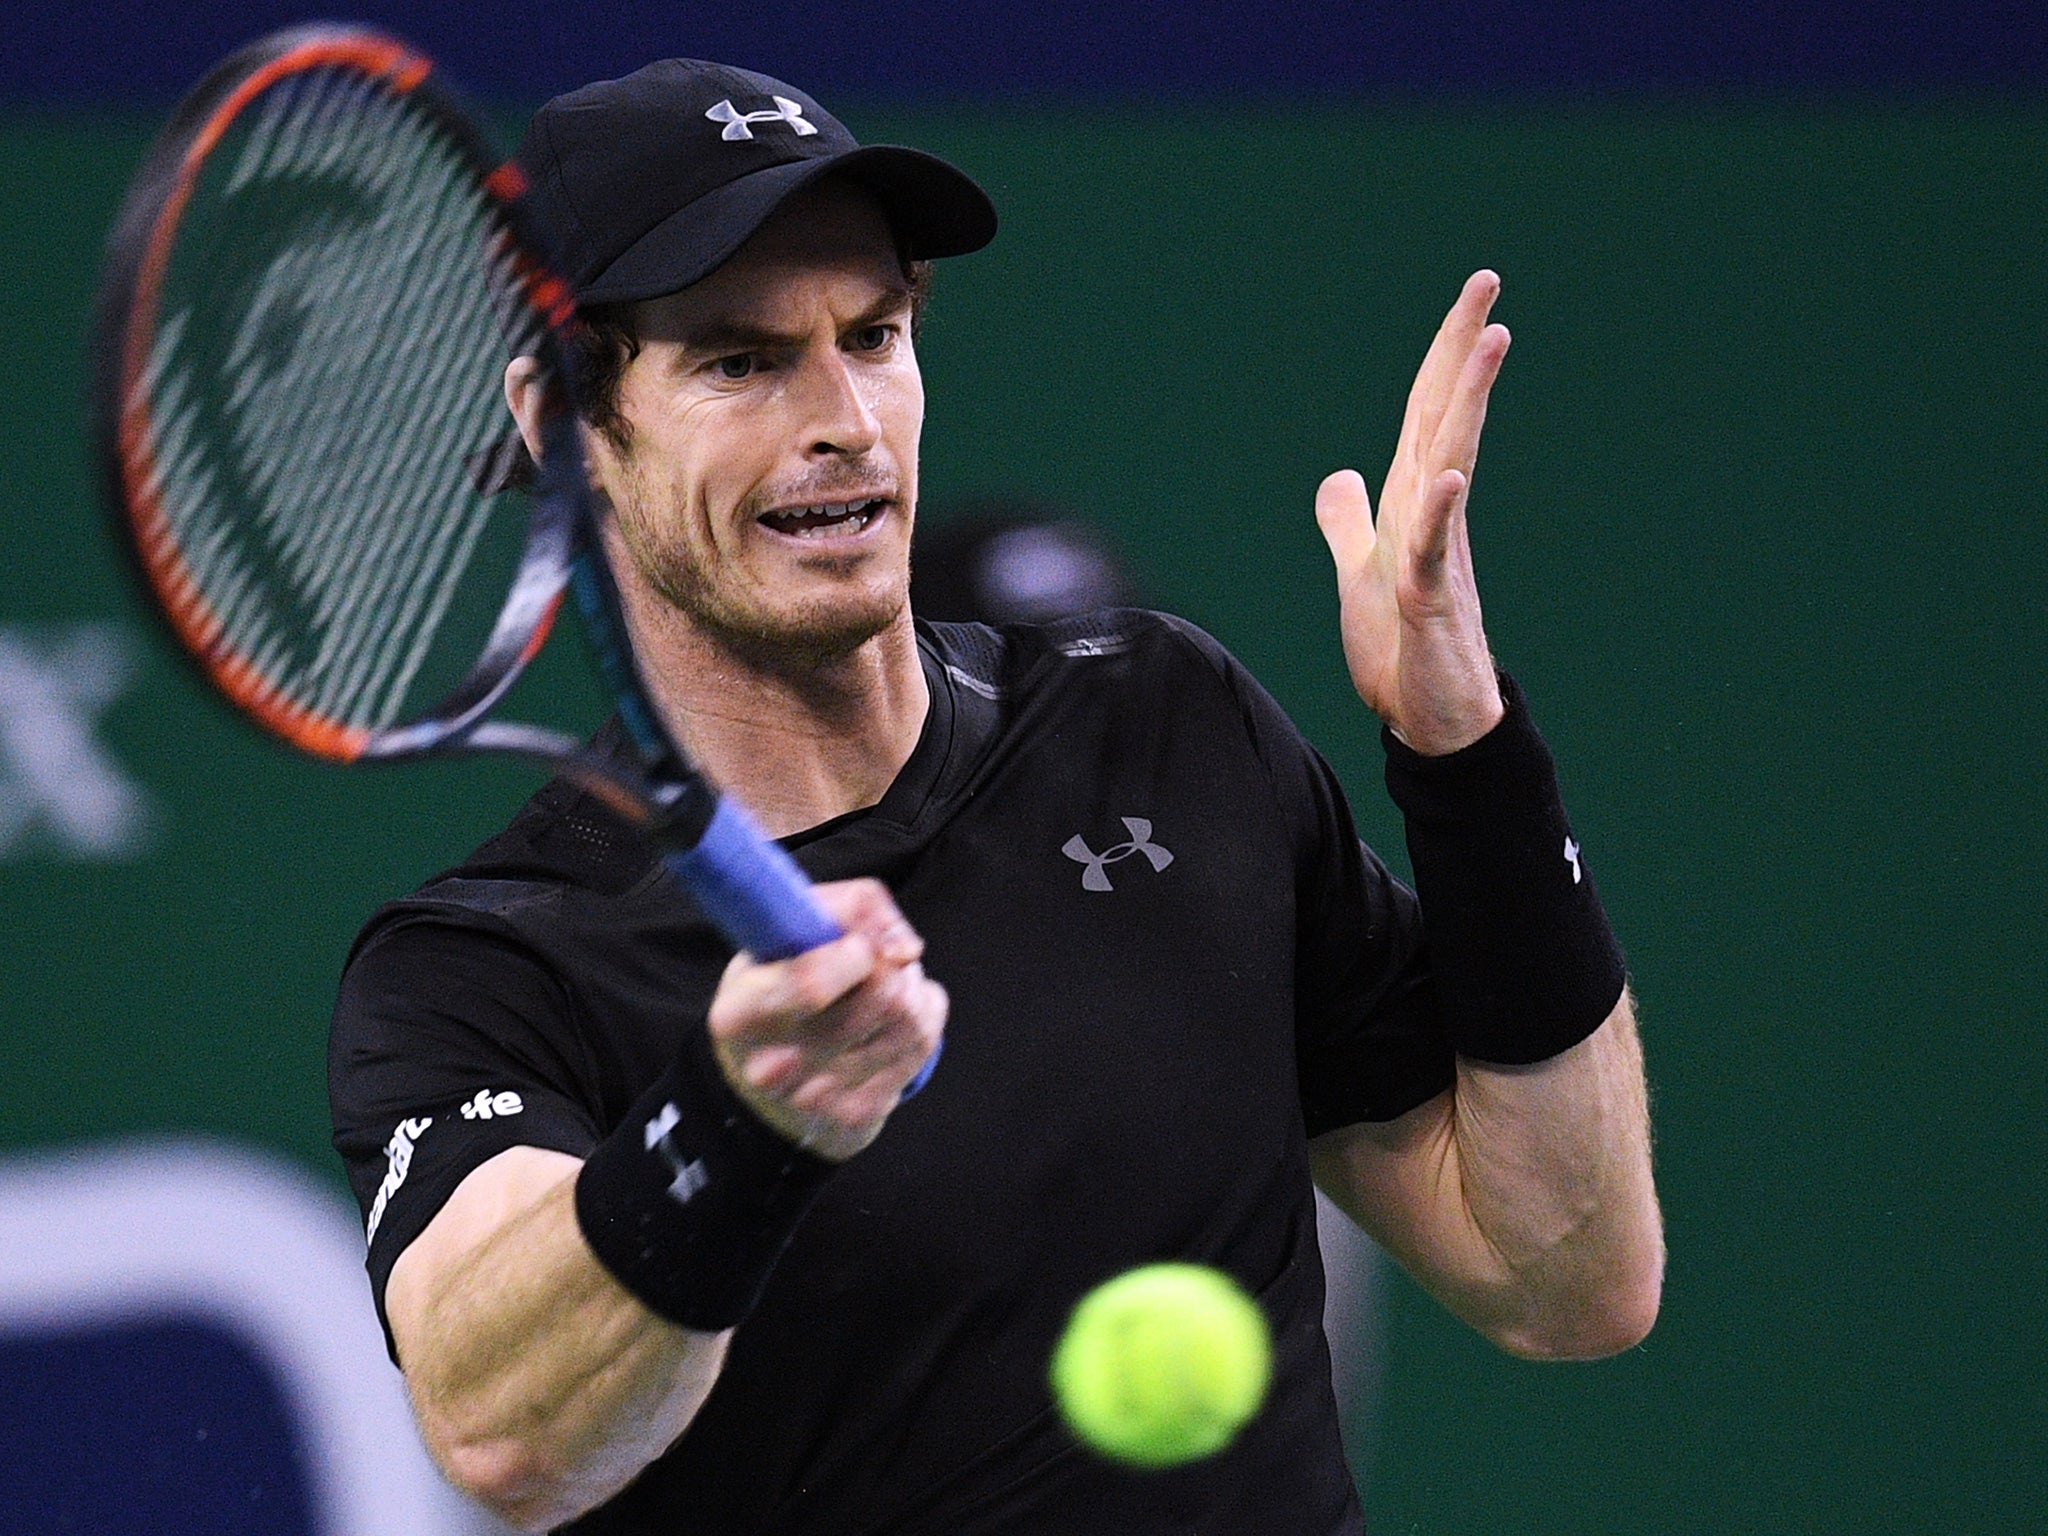 Murray came through his semi-final against Simon in straight sets